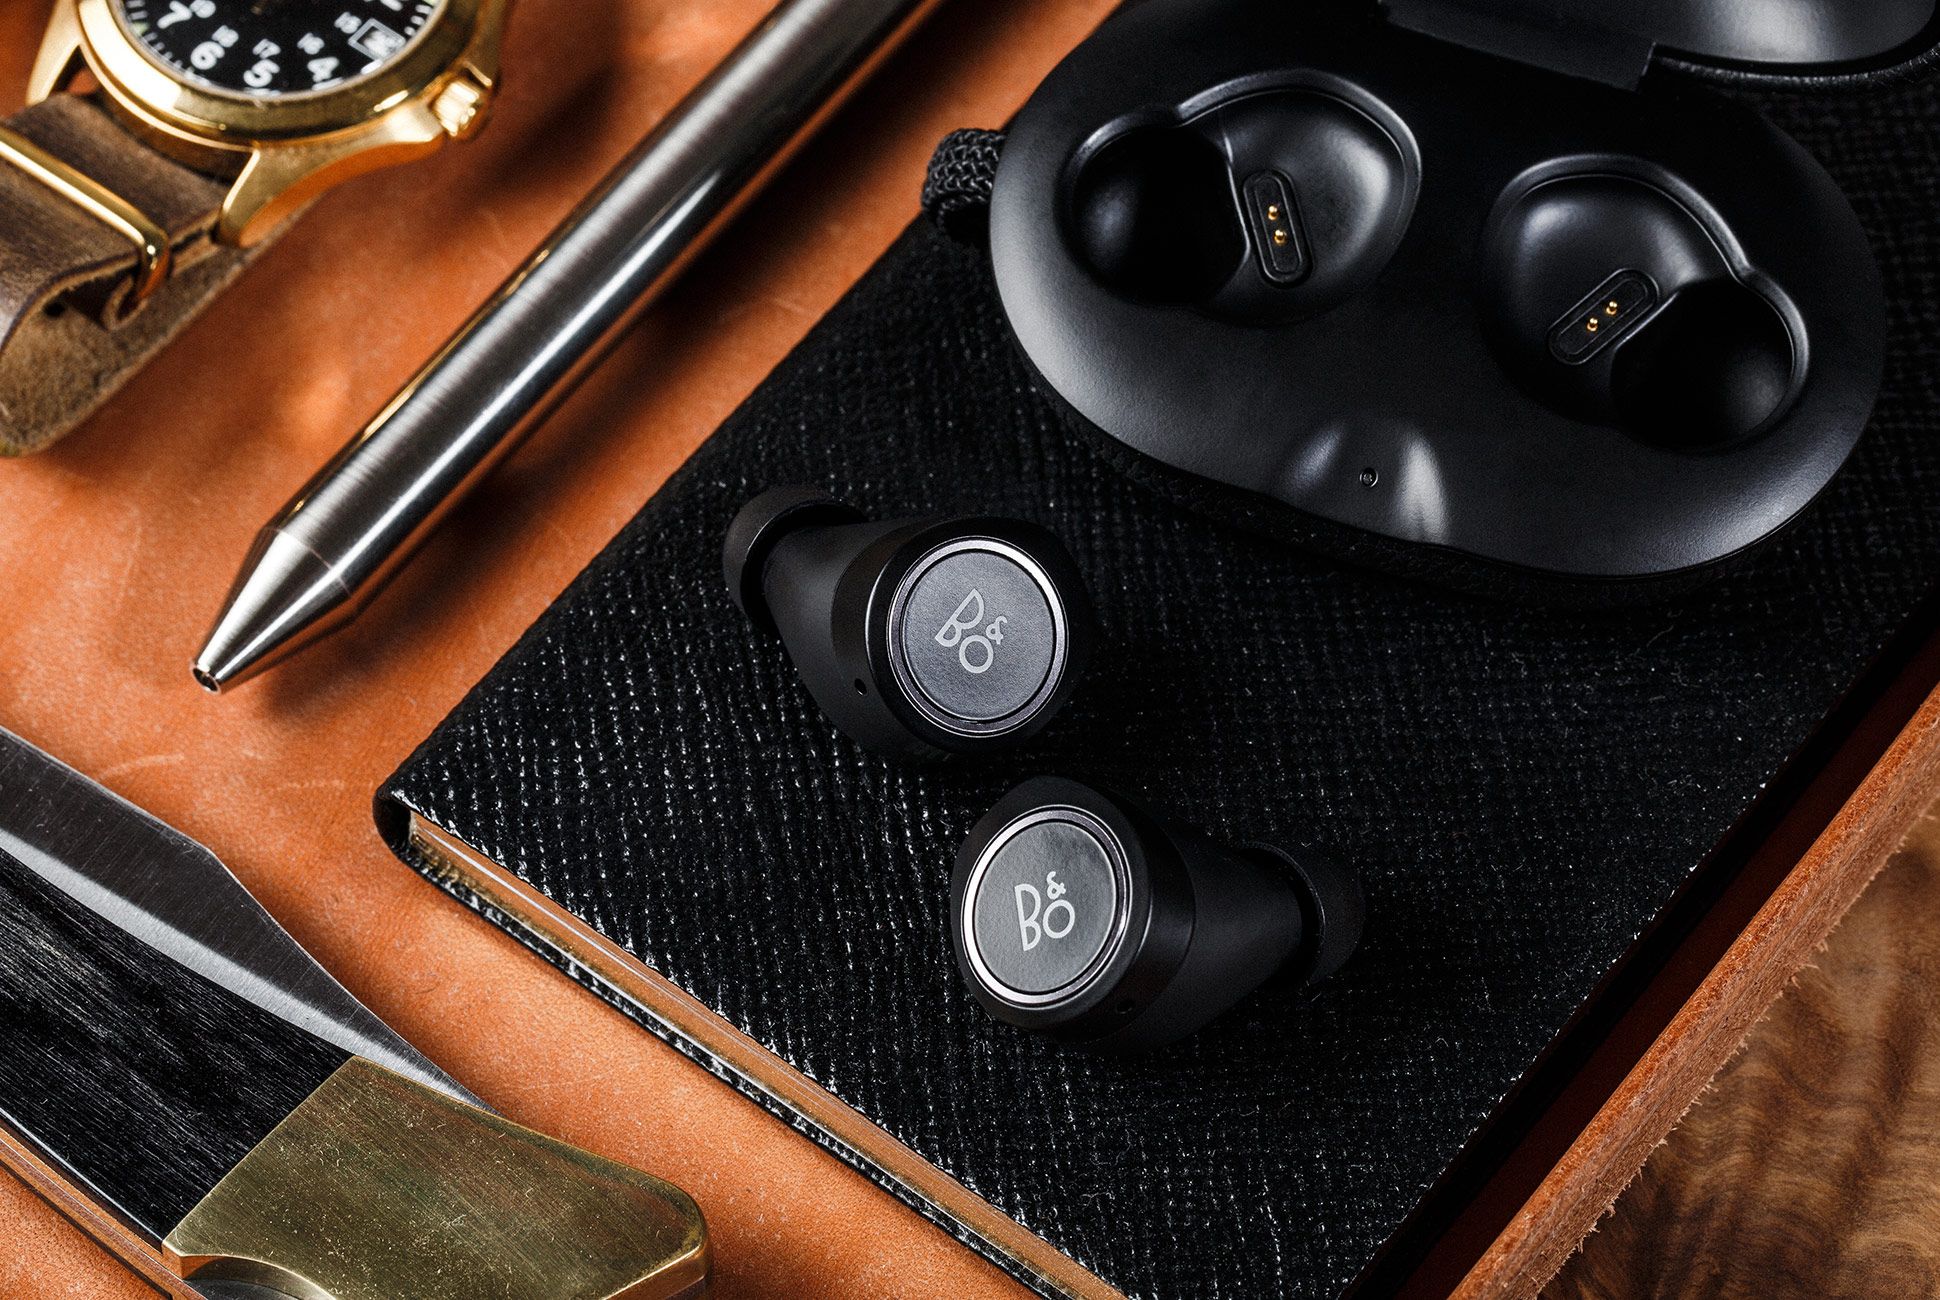 B&O Beoplay E8 AirPod Alternatives For Those Who Care About